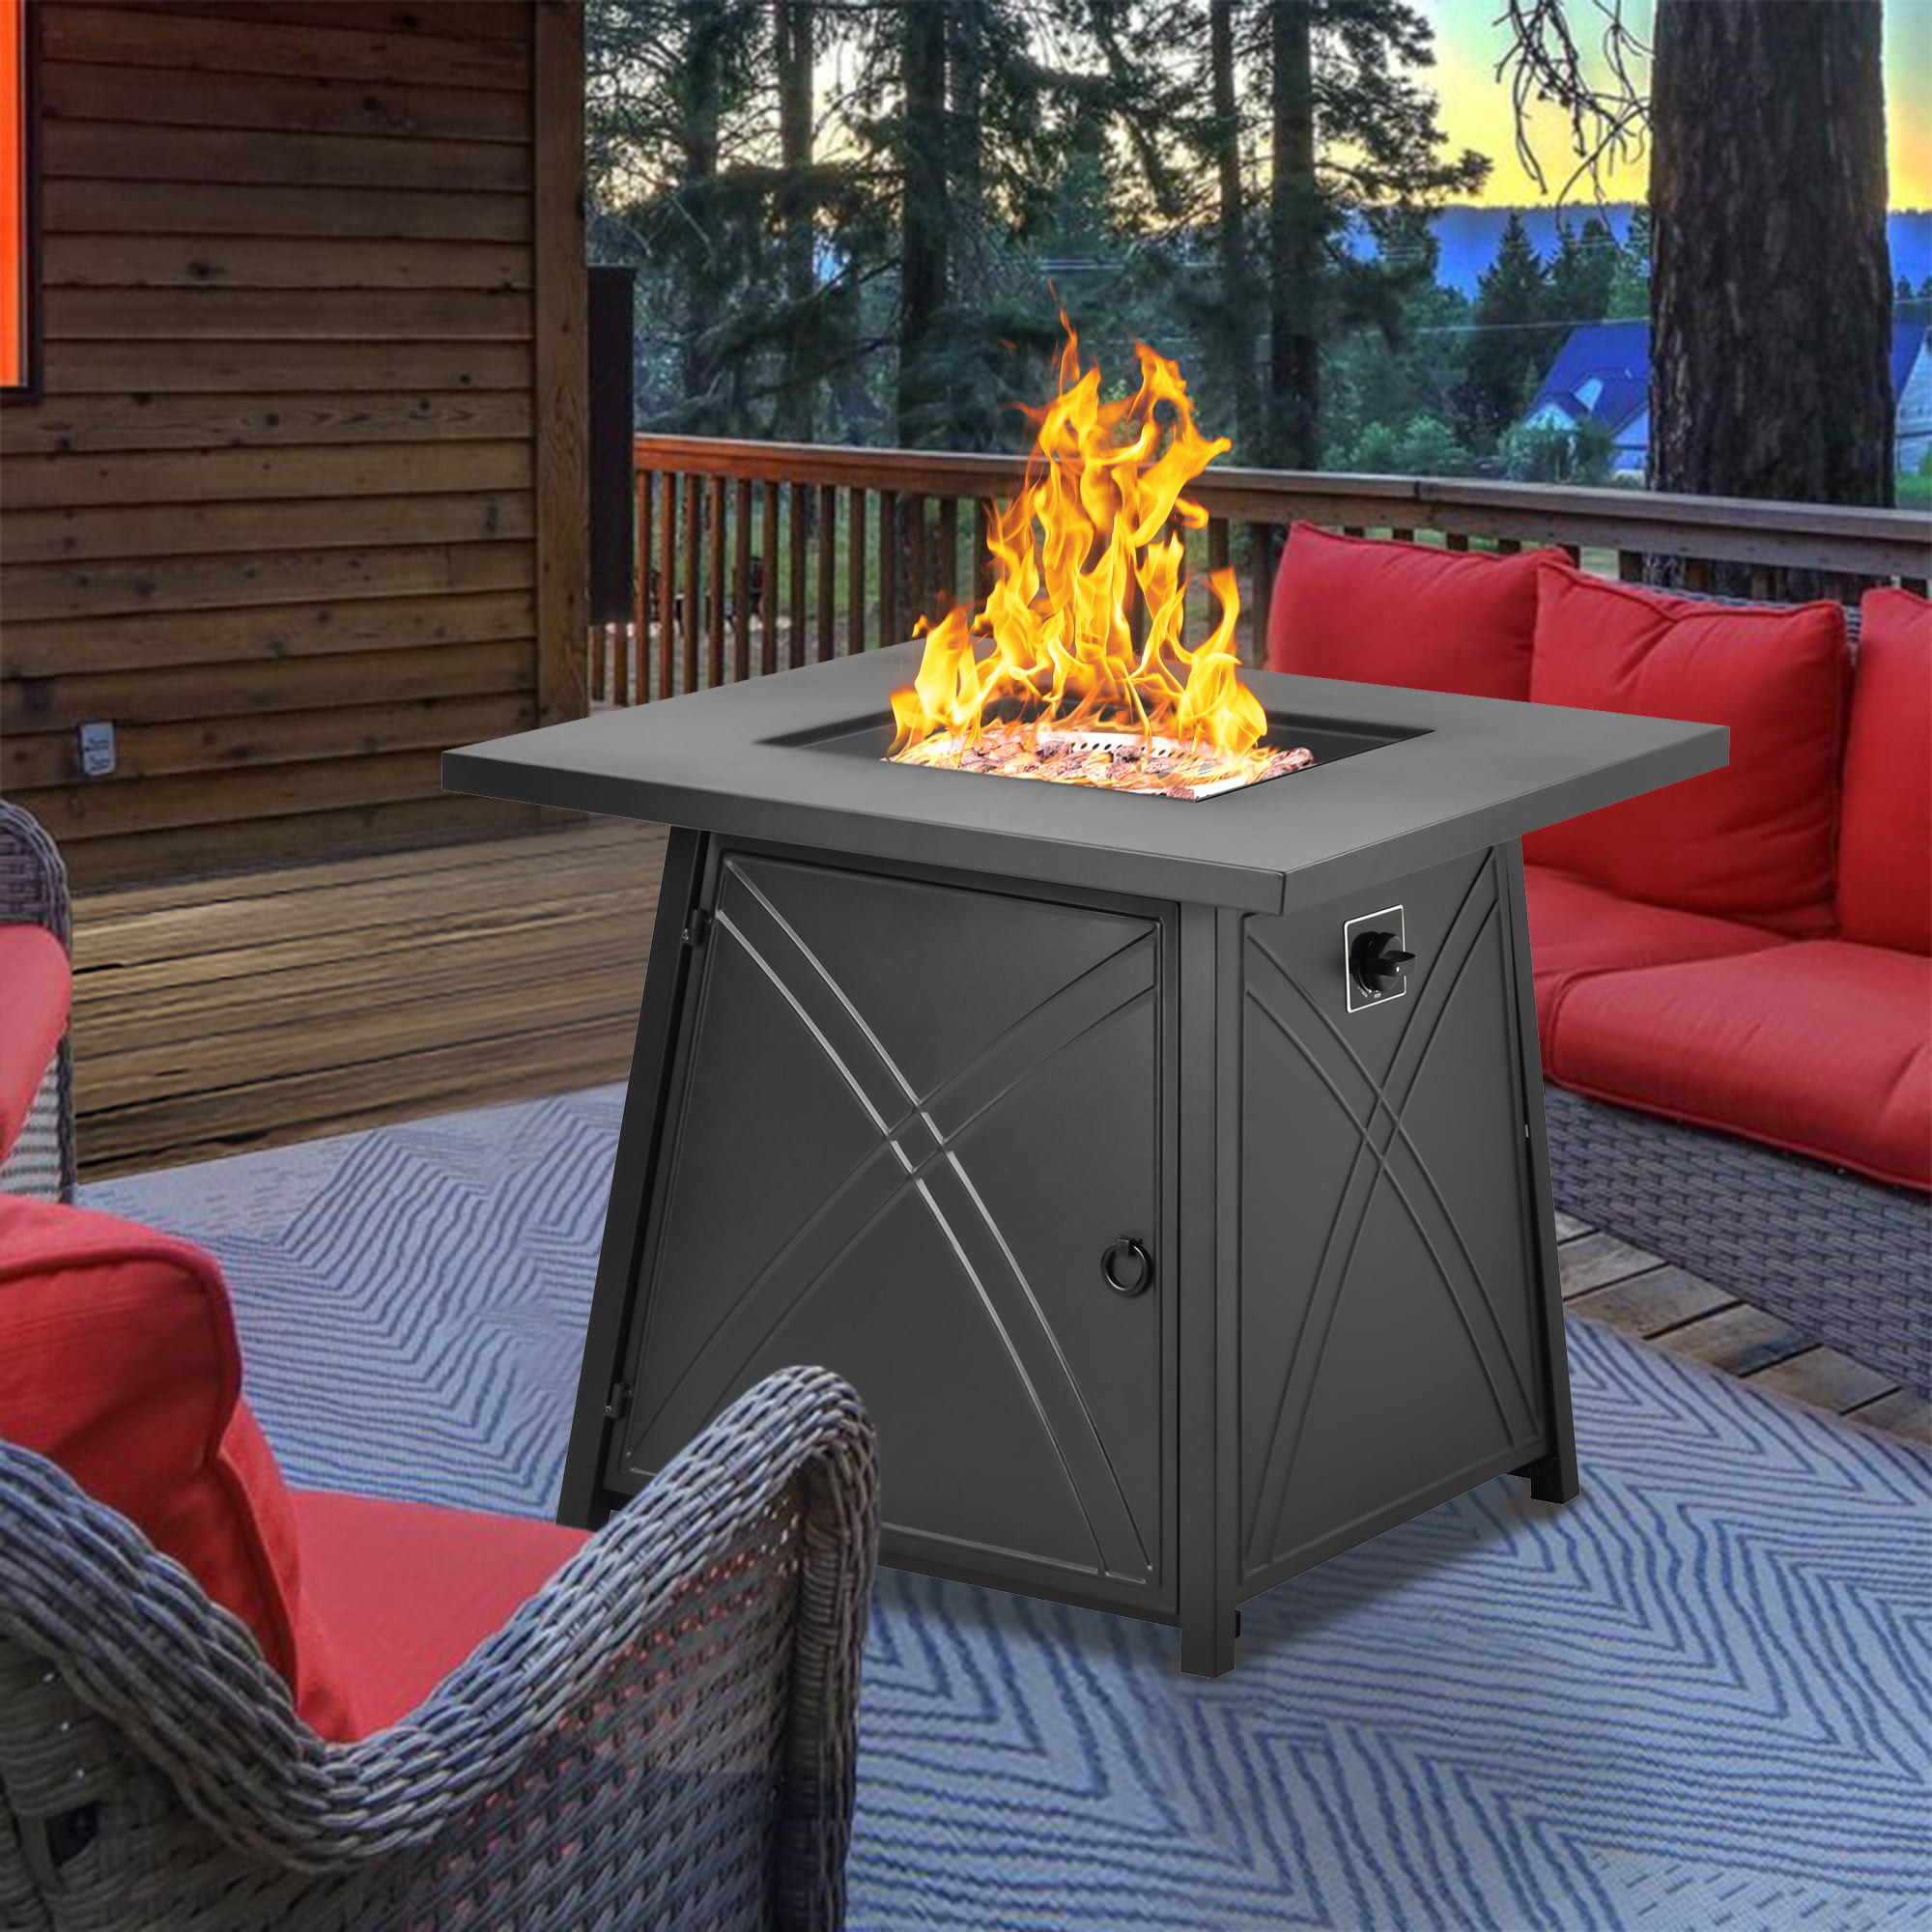 Details about   28" Outdoor Fire Pit Wood Burning Backyard Patio Bowl Fireplace Heater w/ Cover 